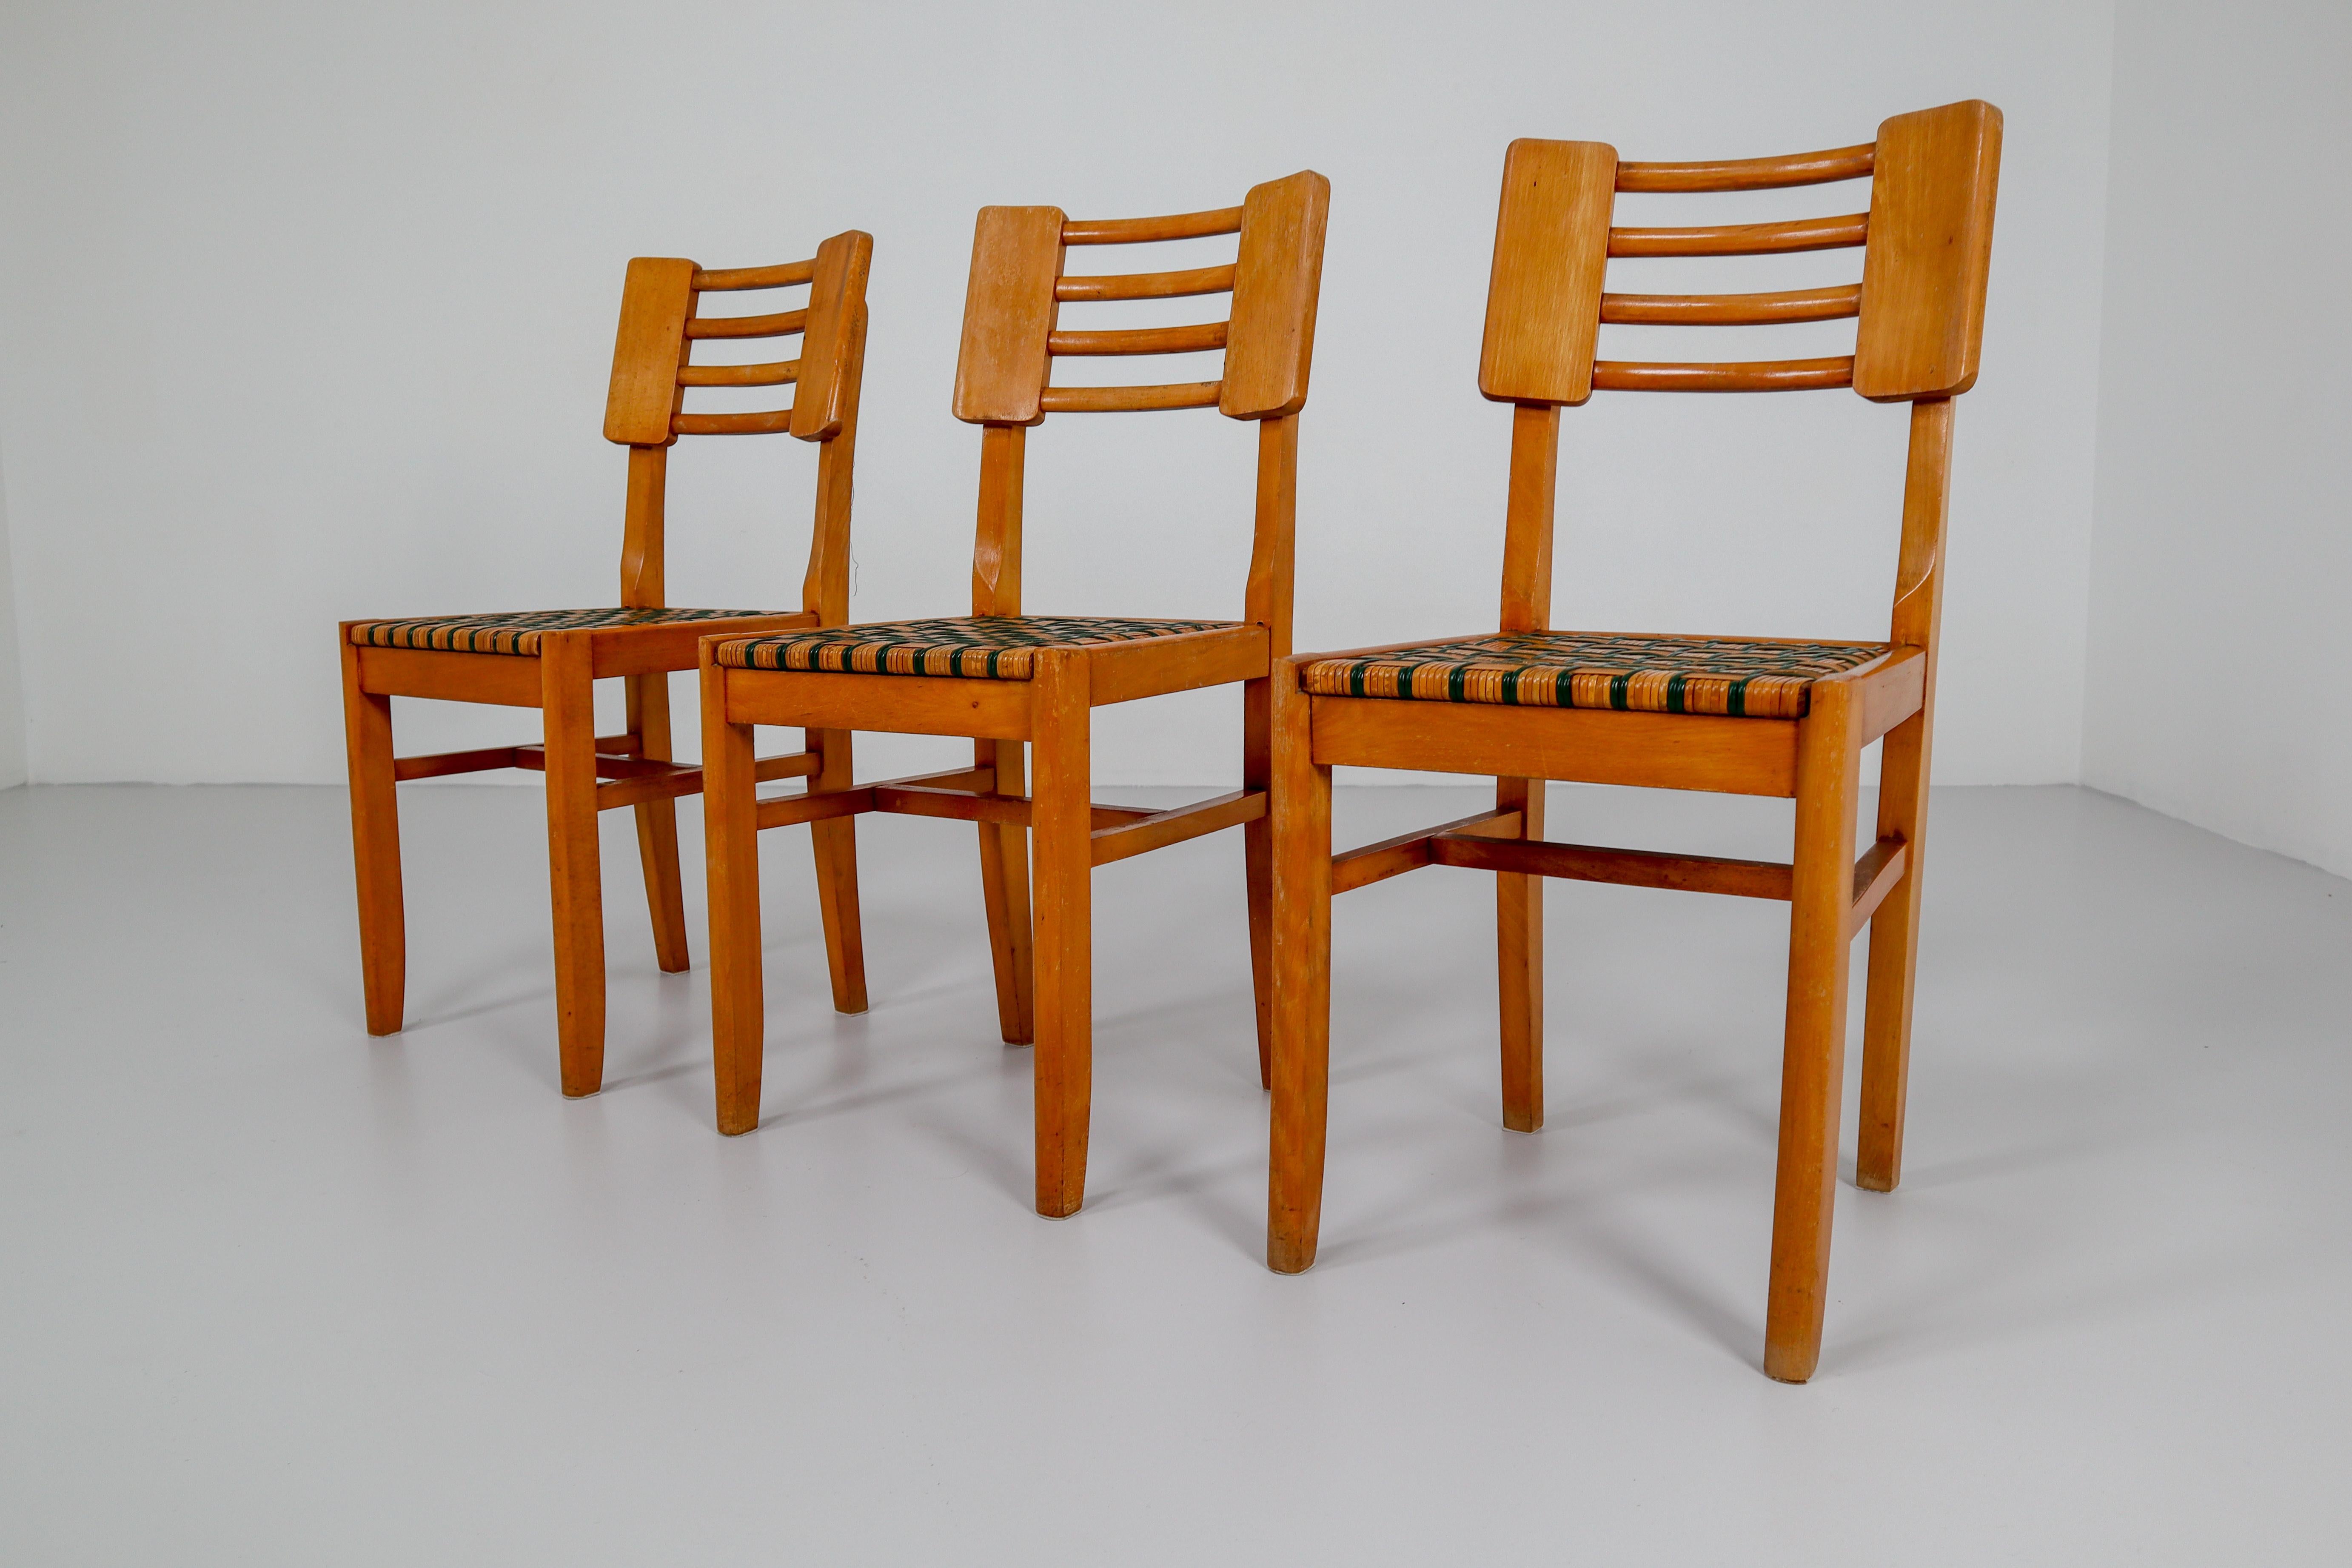 Beautiful set of six dinner chairs by unknown designer. Manufactured in France, circa 1950 in the manner of works by Charlotte Perriand or Gustave Serrurier-Bovy.
Solid beech frame and rattan seat, in good original condition.